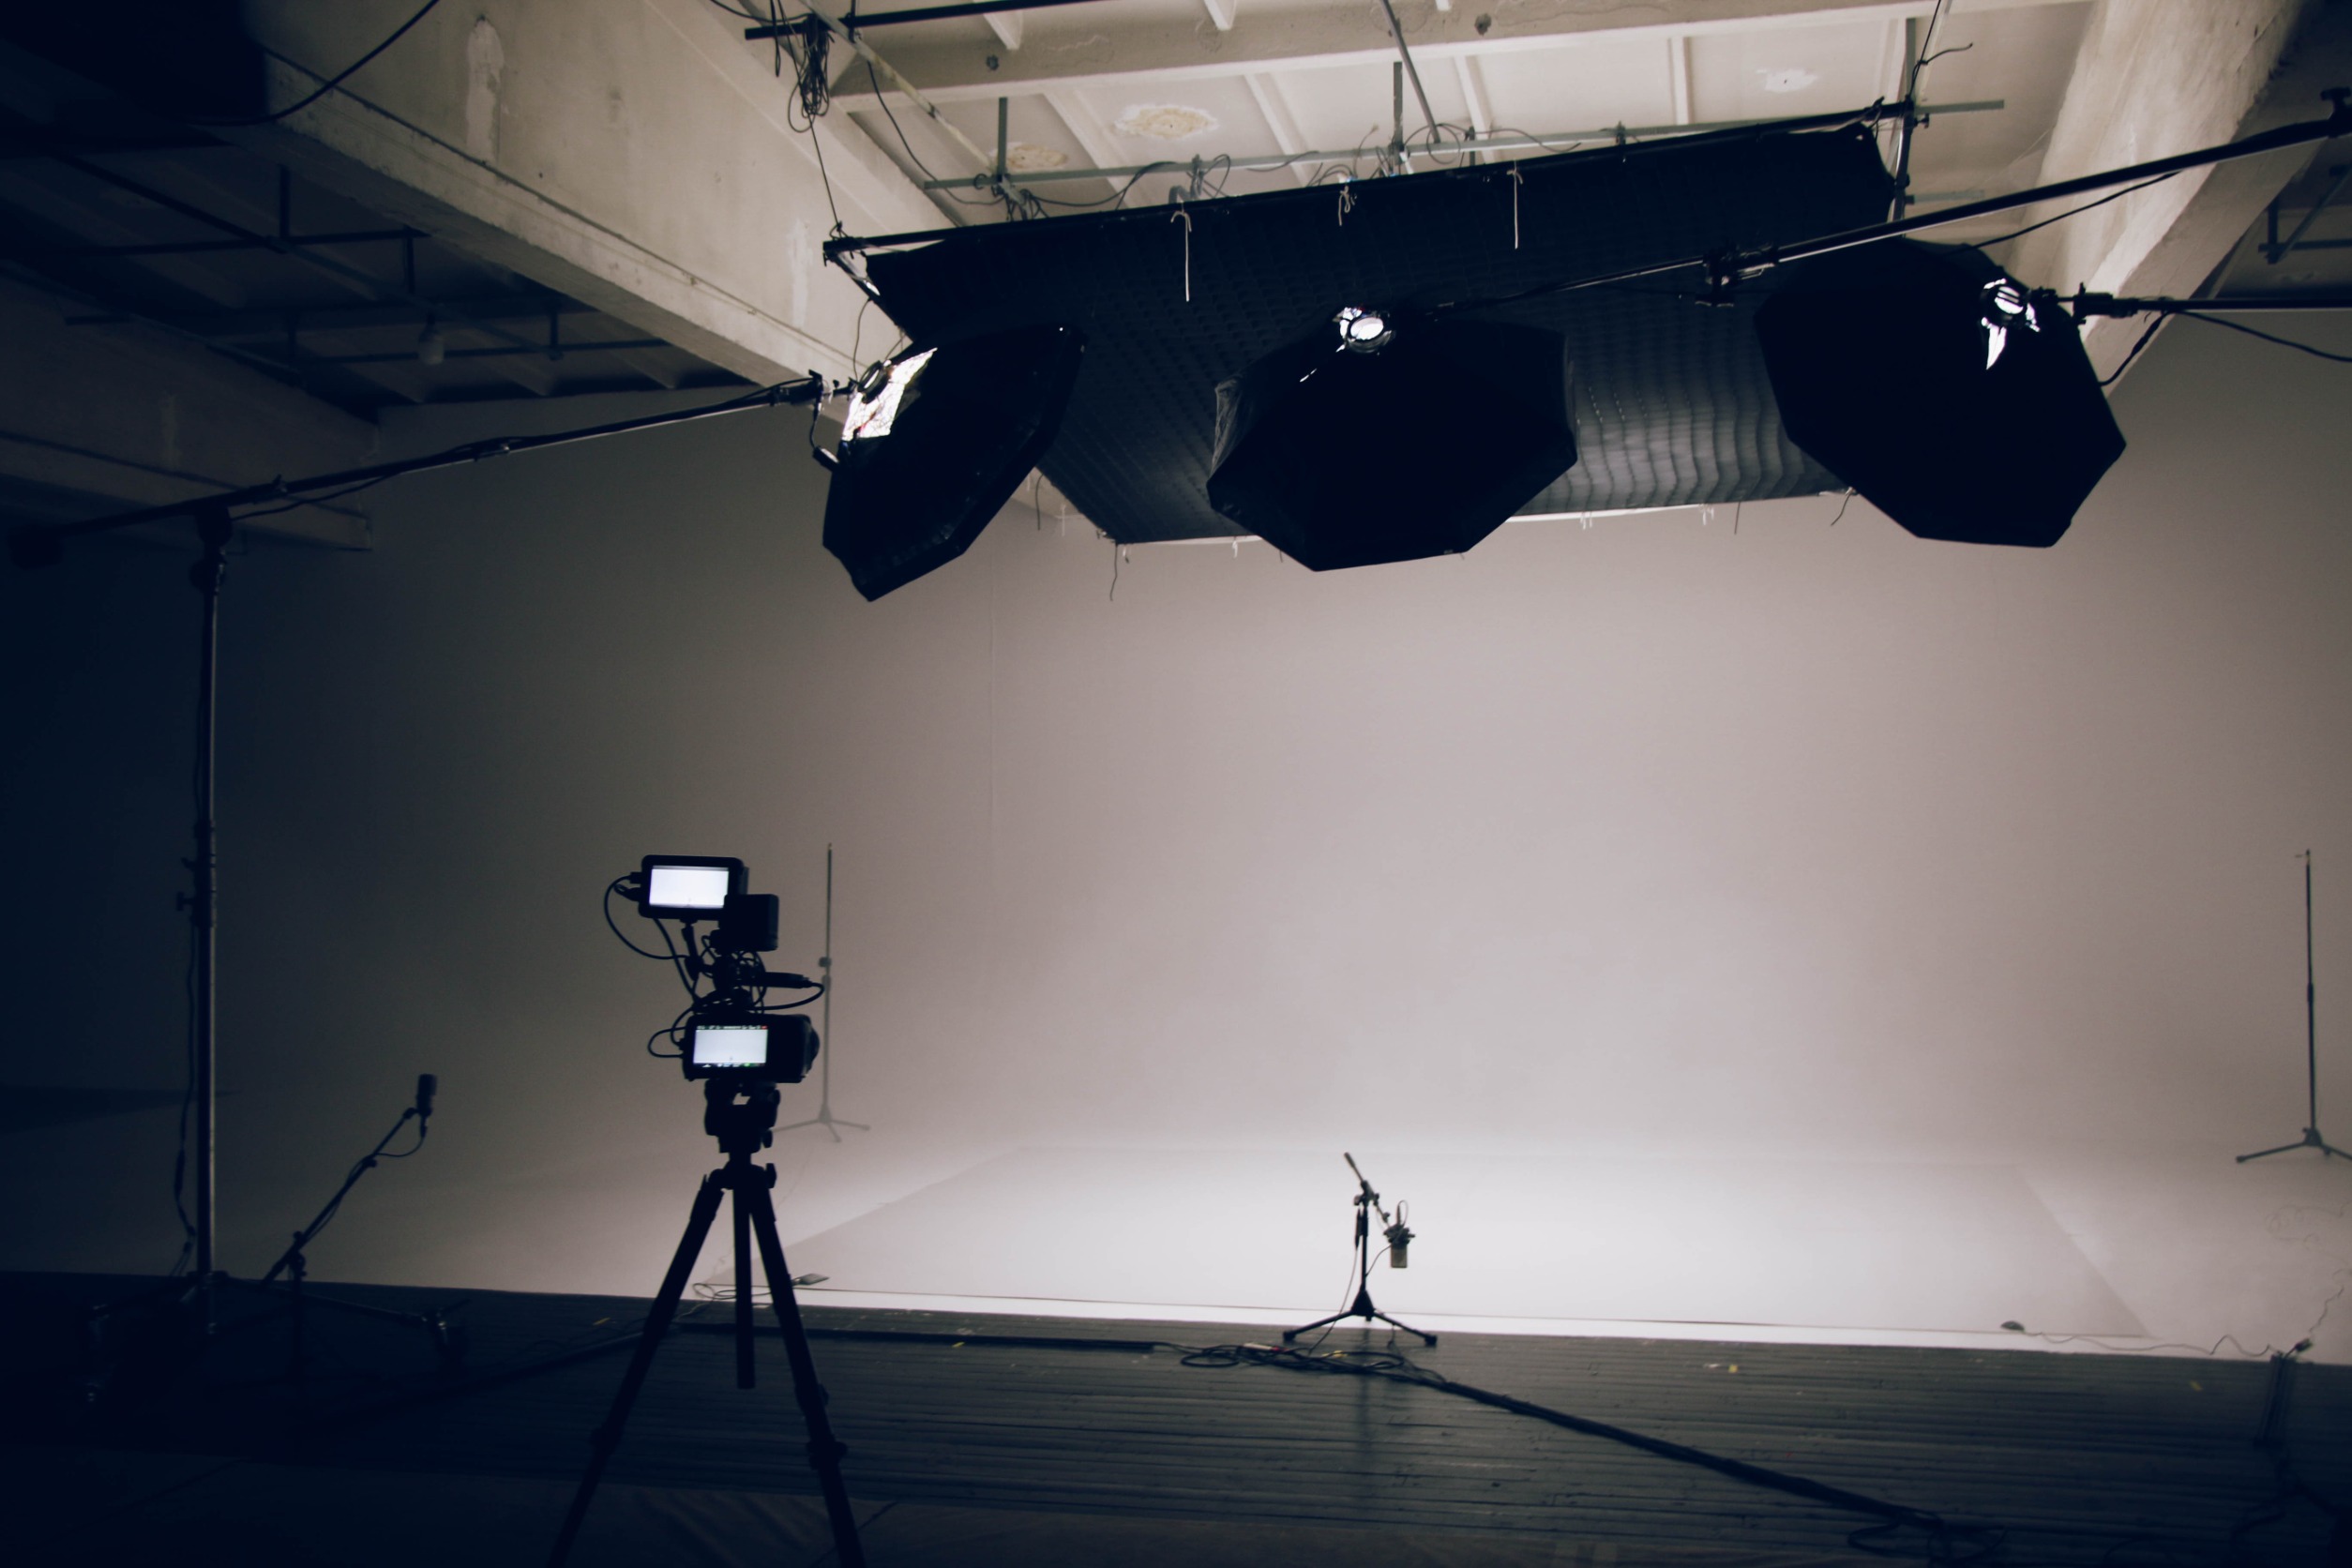 What Is The Importance Of Good Lighting In Video Production?